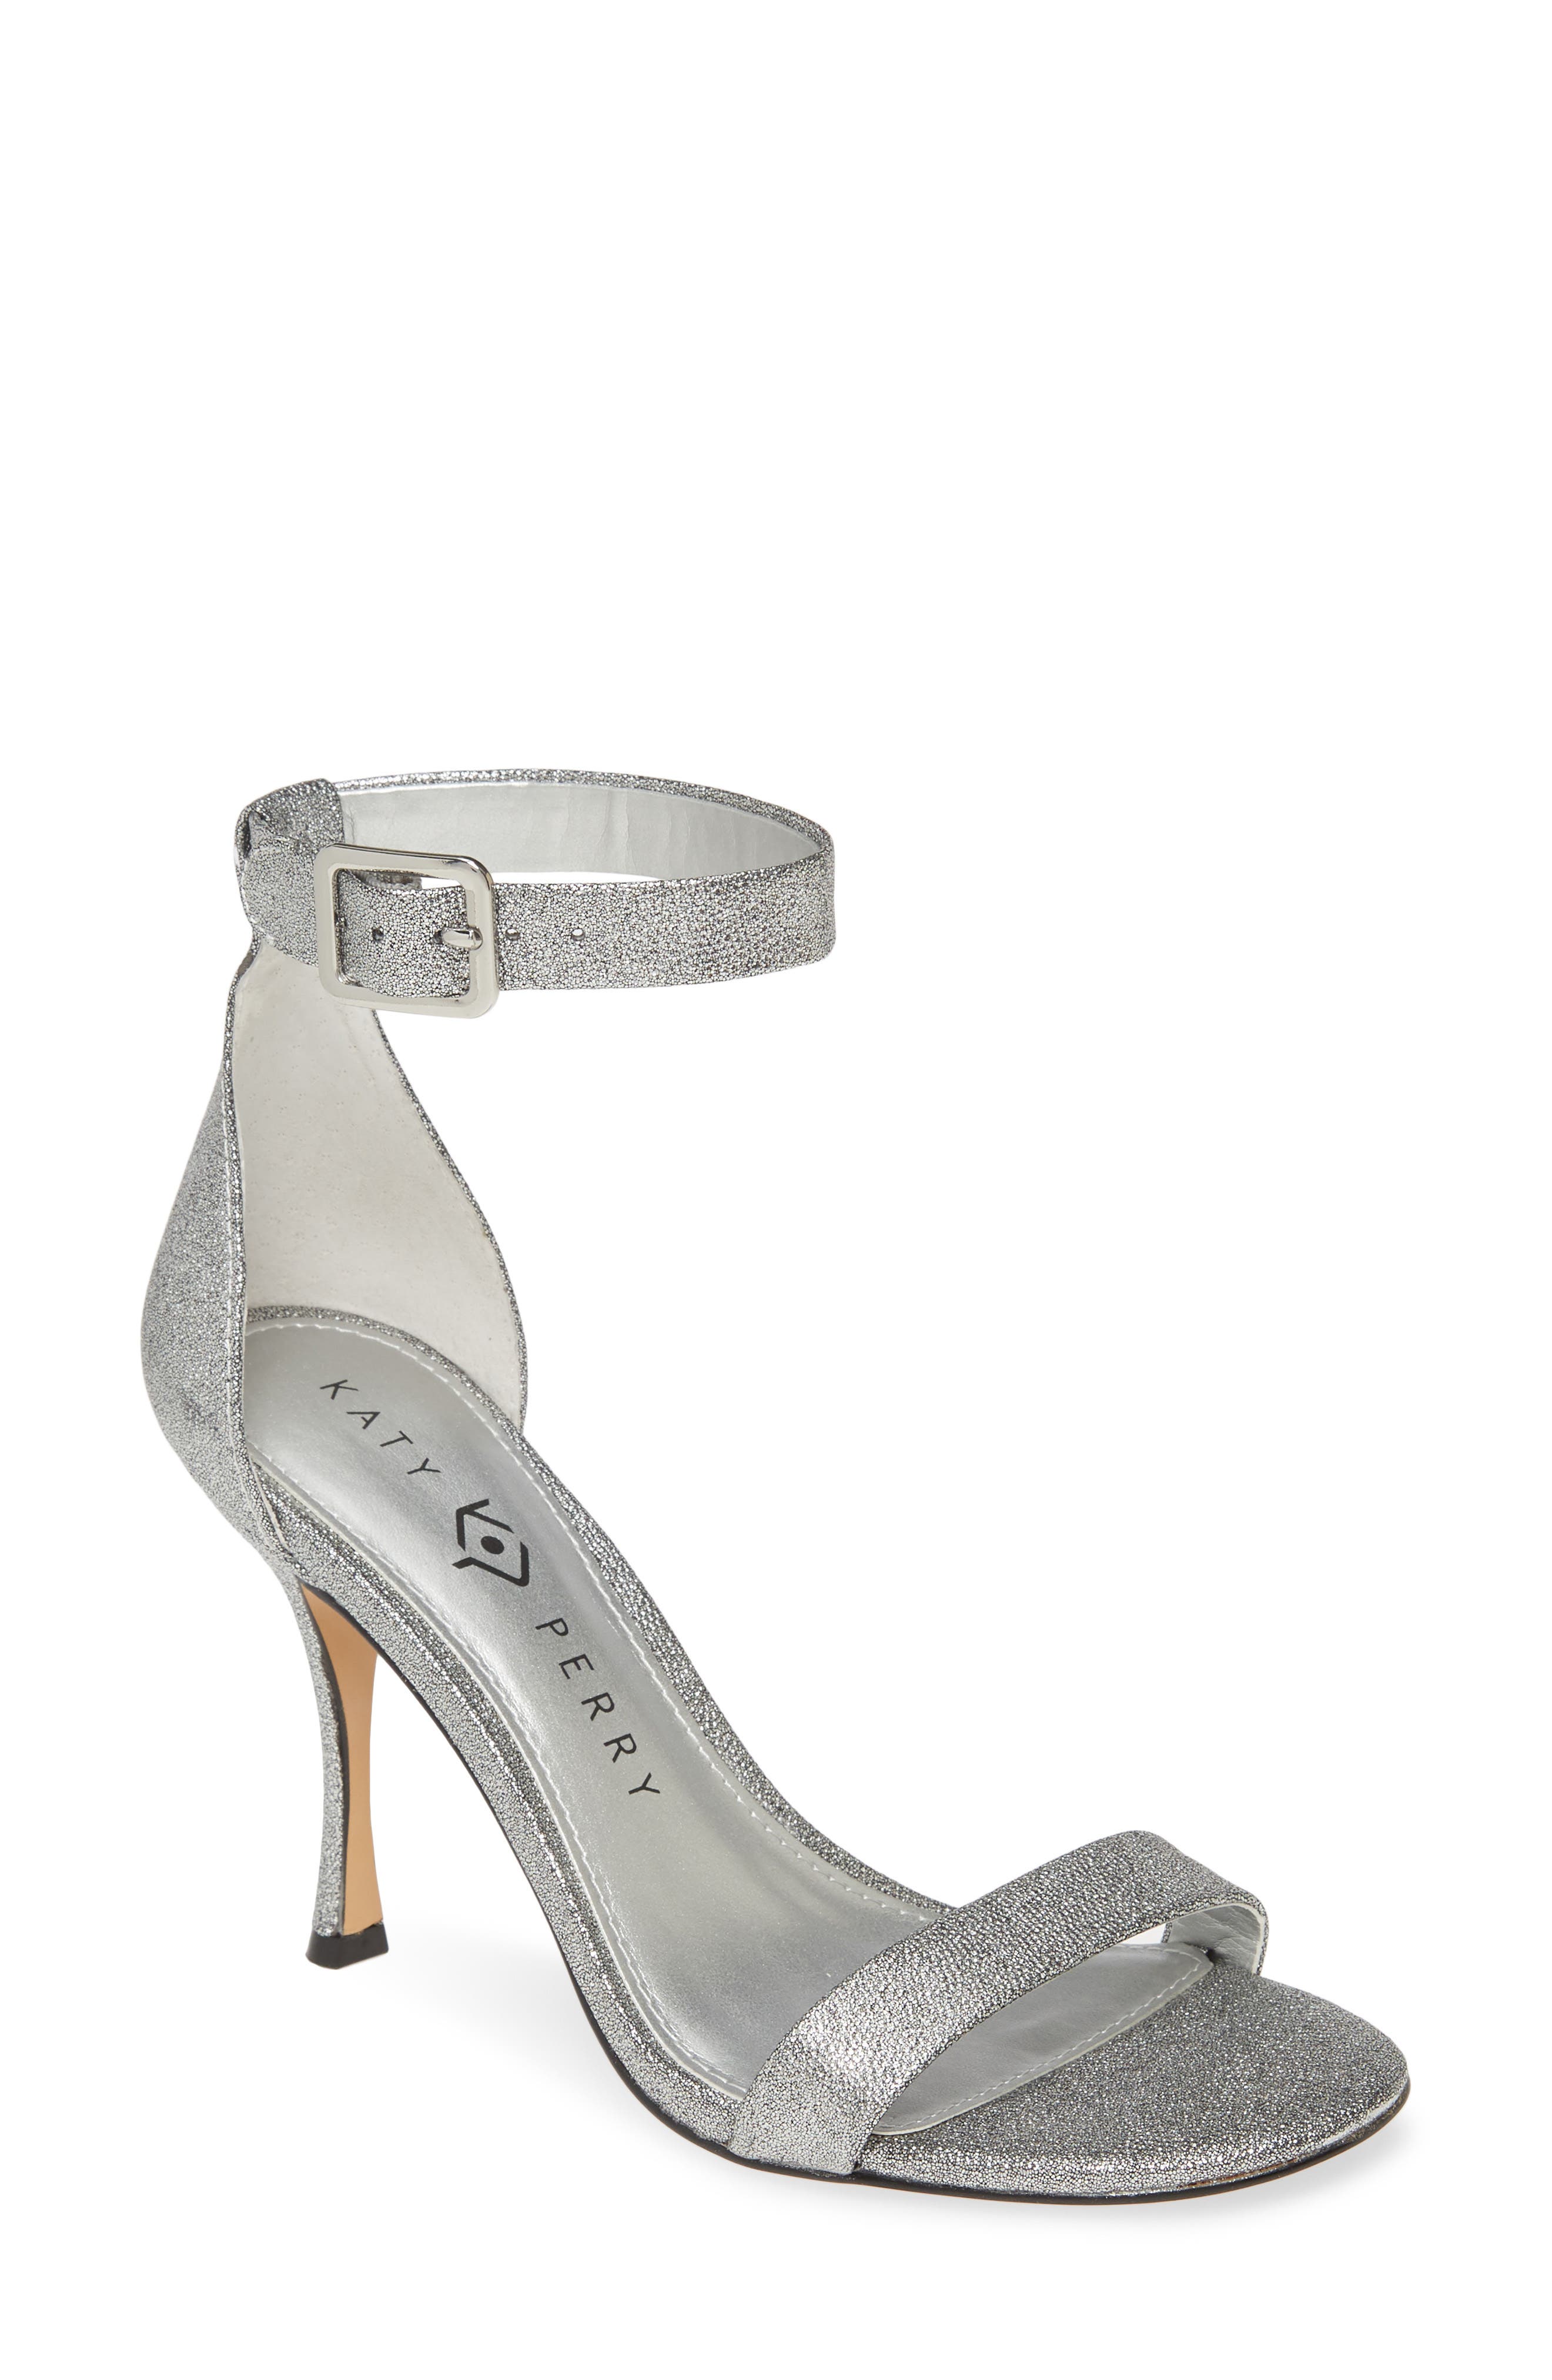 Women's Katy Perry Shoes | Nordstrom